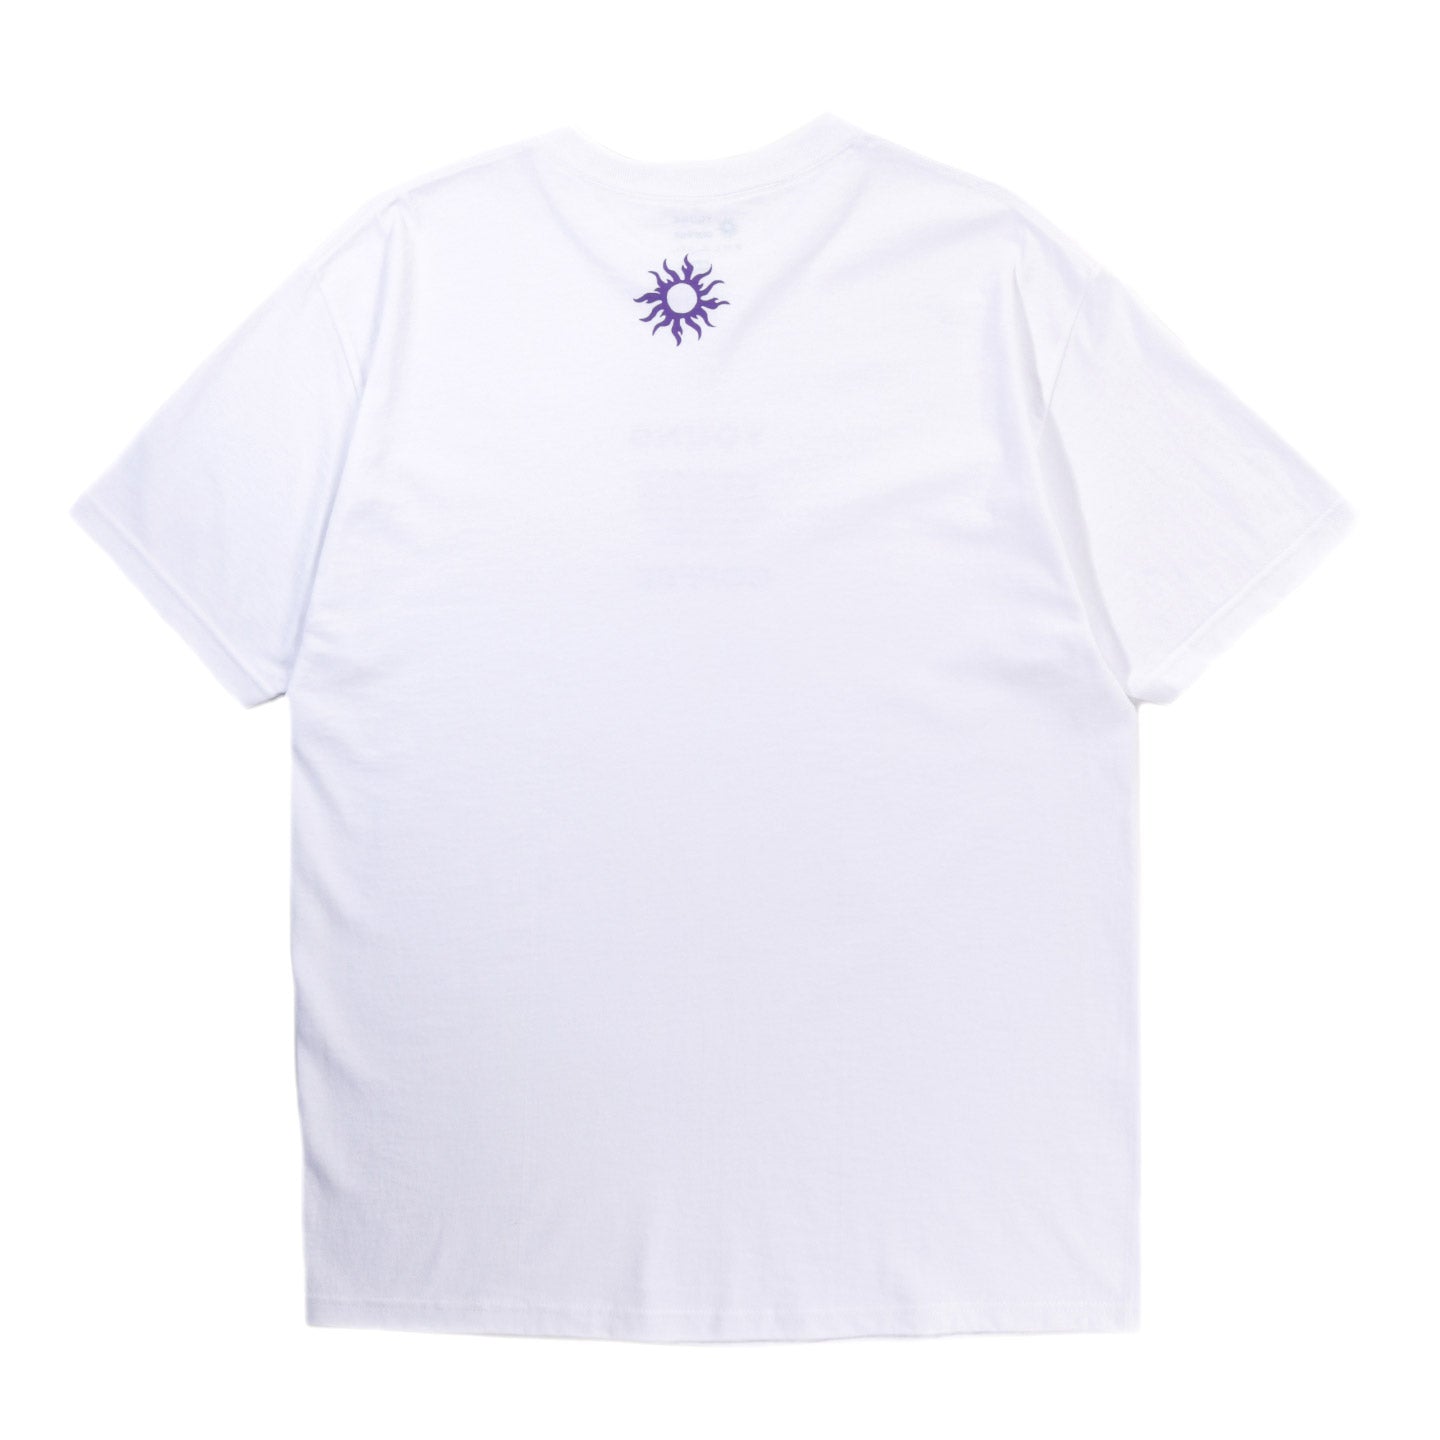 YOUNG COFFEE LABEL TEE WHITE